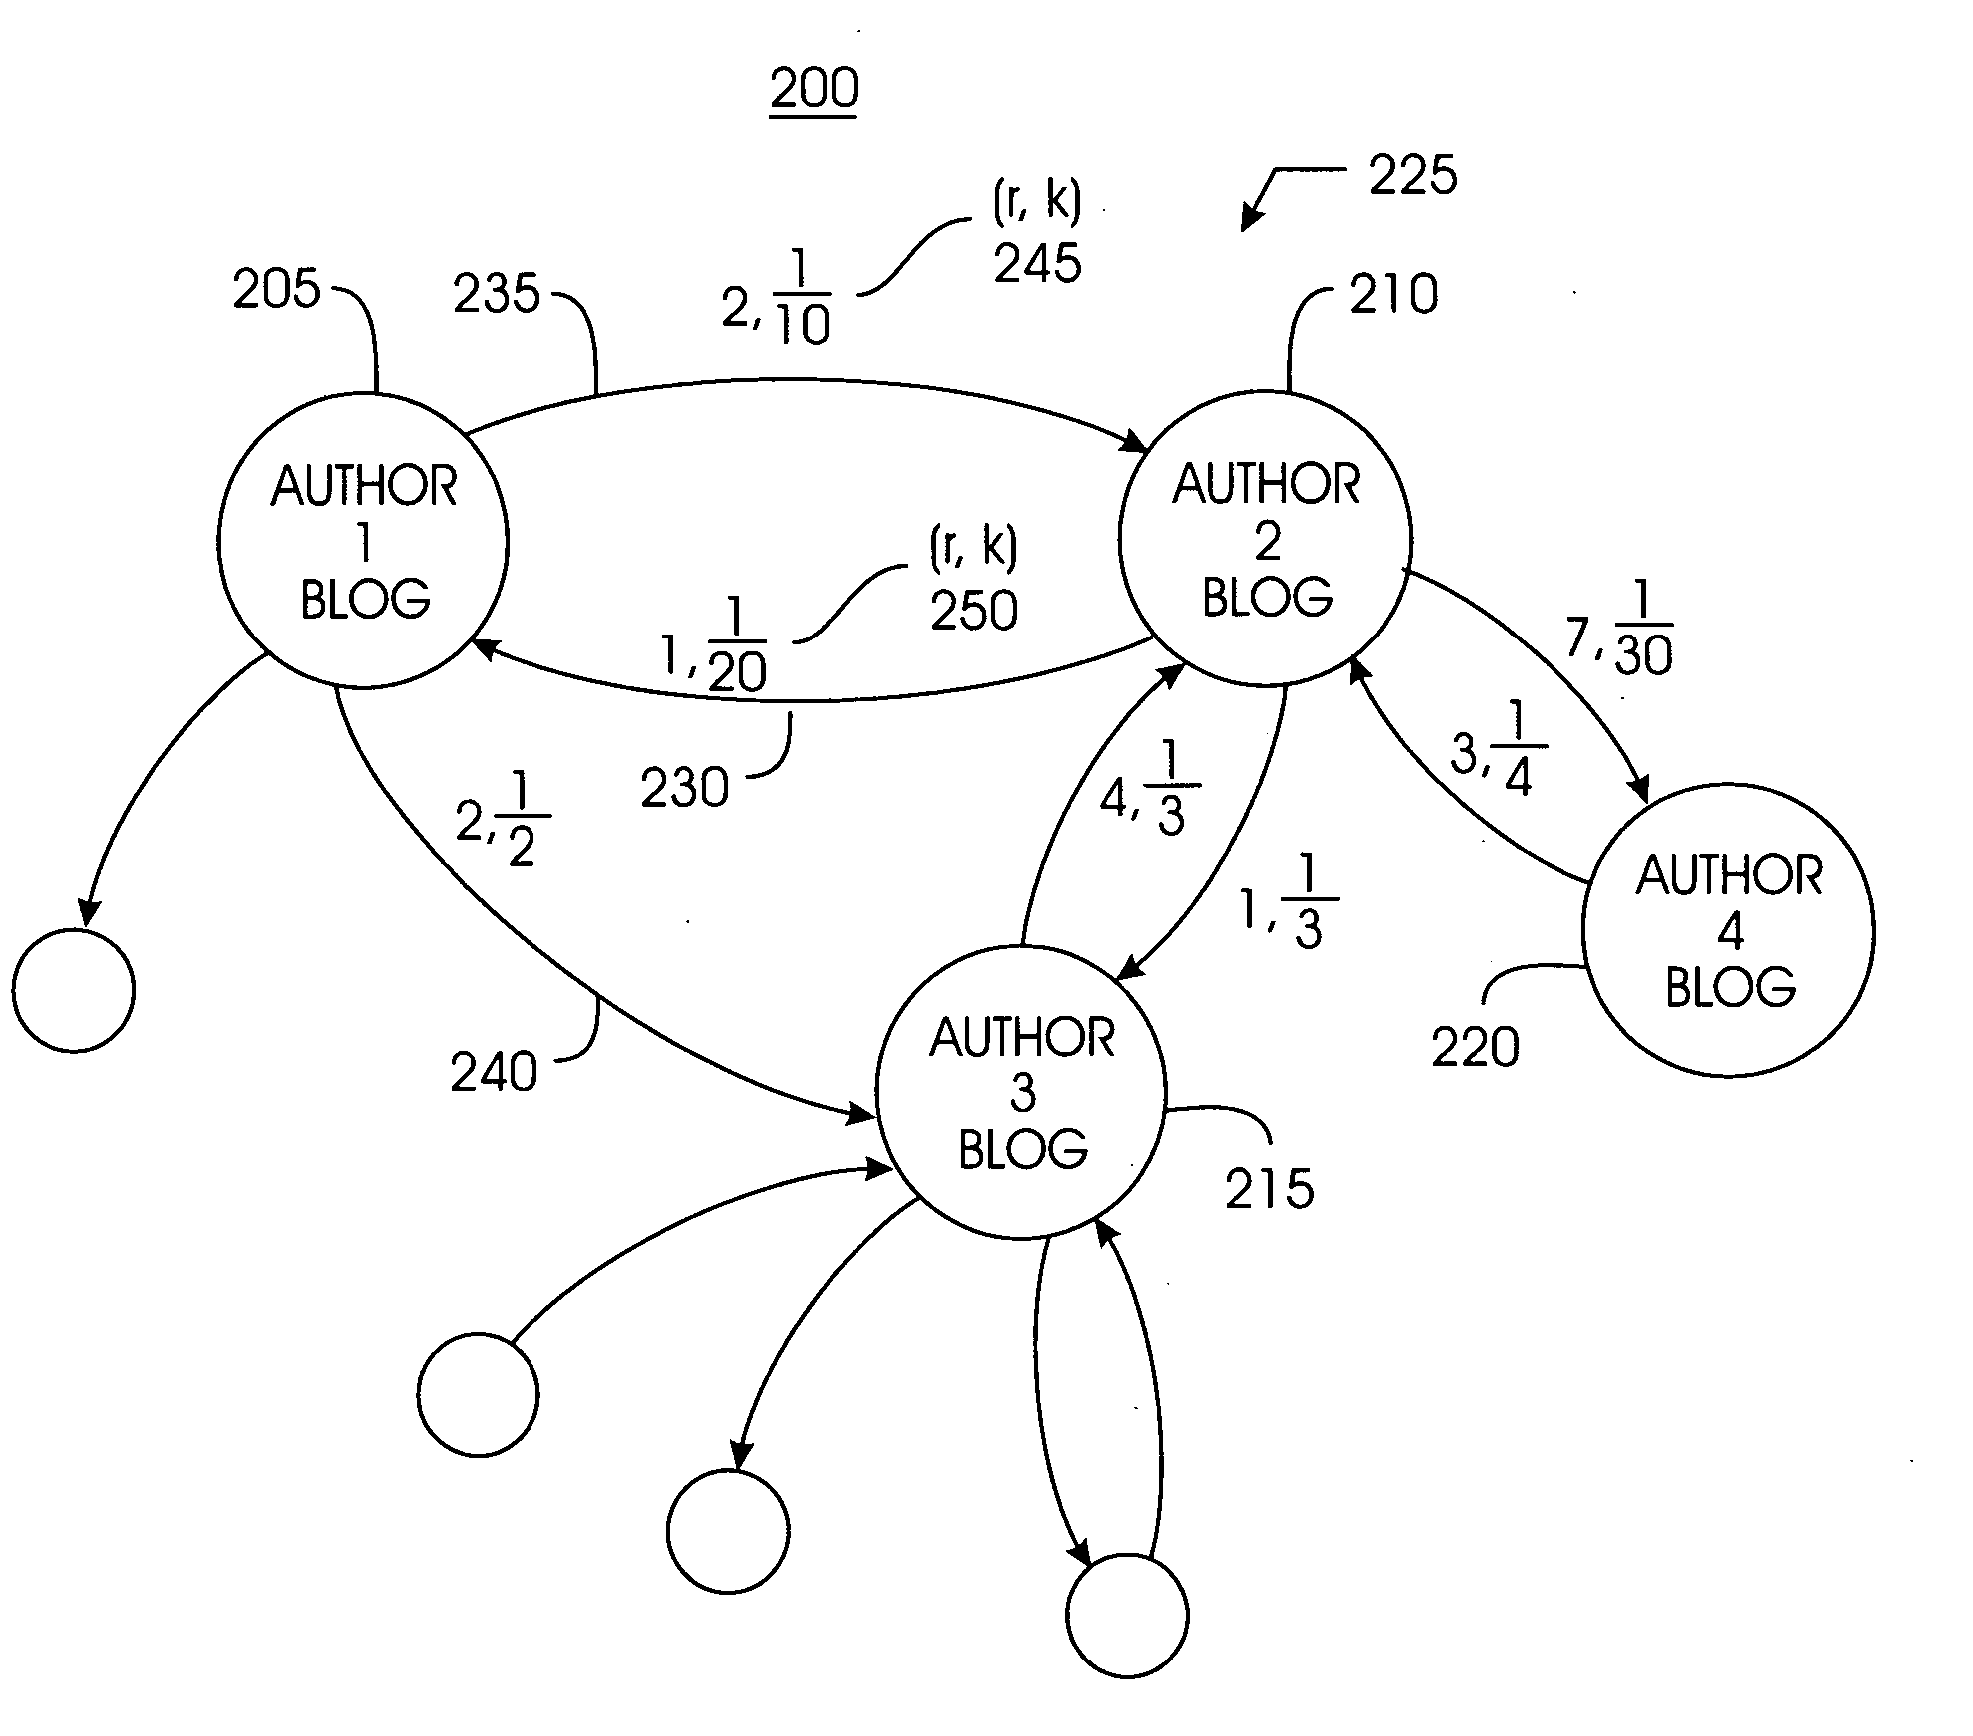 System, method, and service for inducing a pattern of communication among various parties